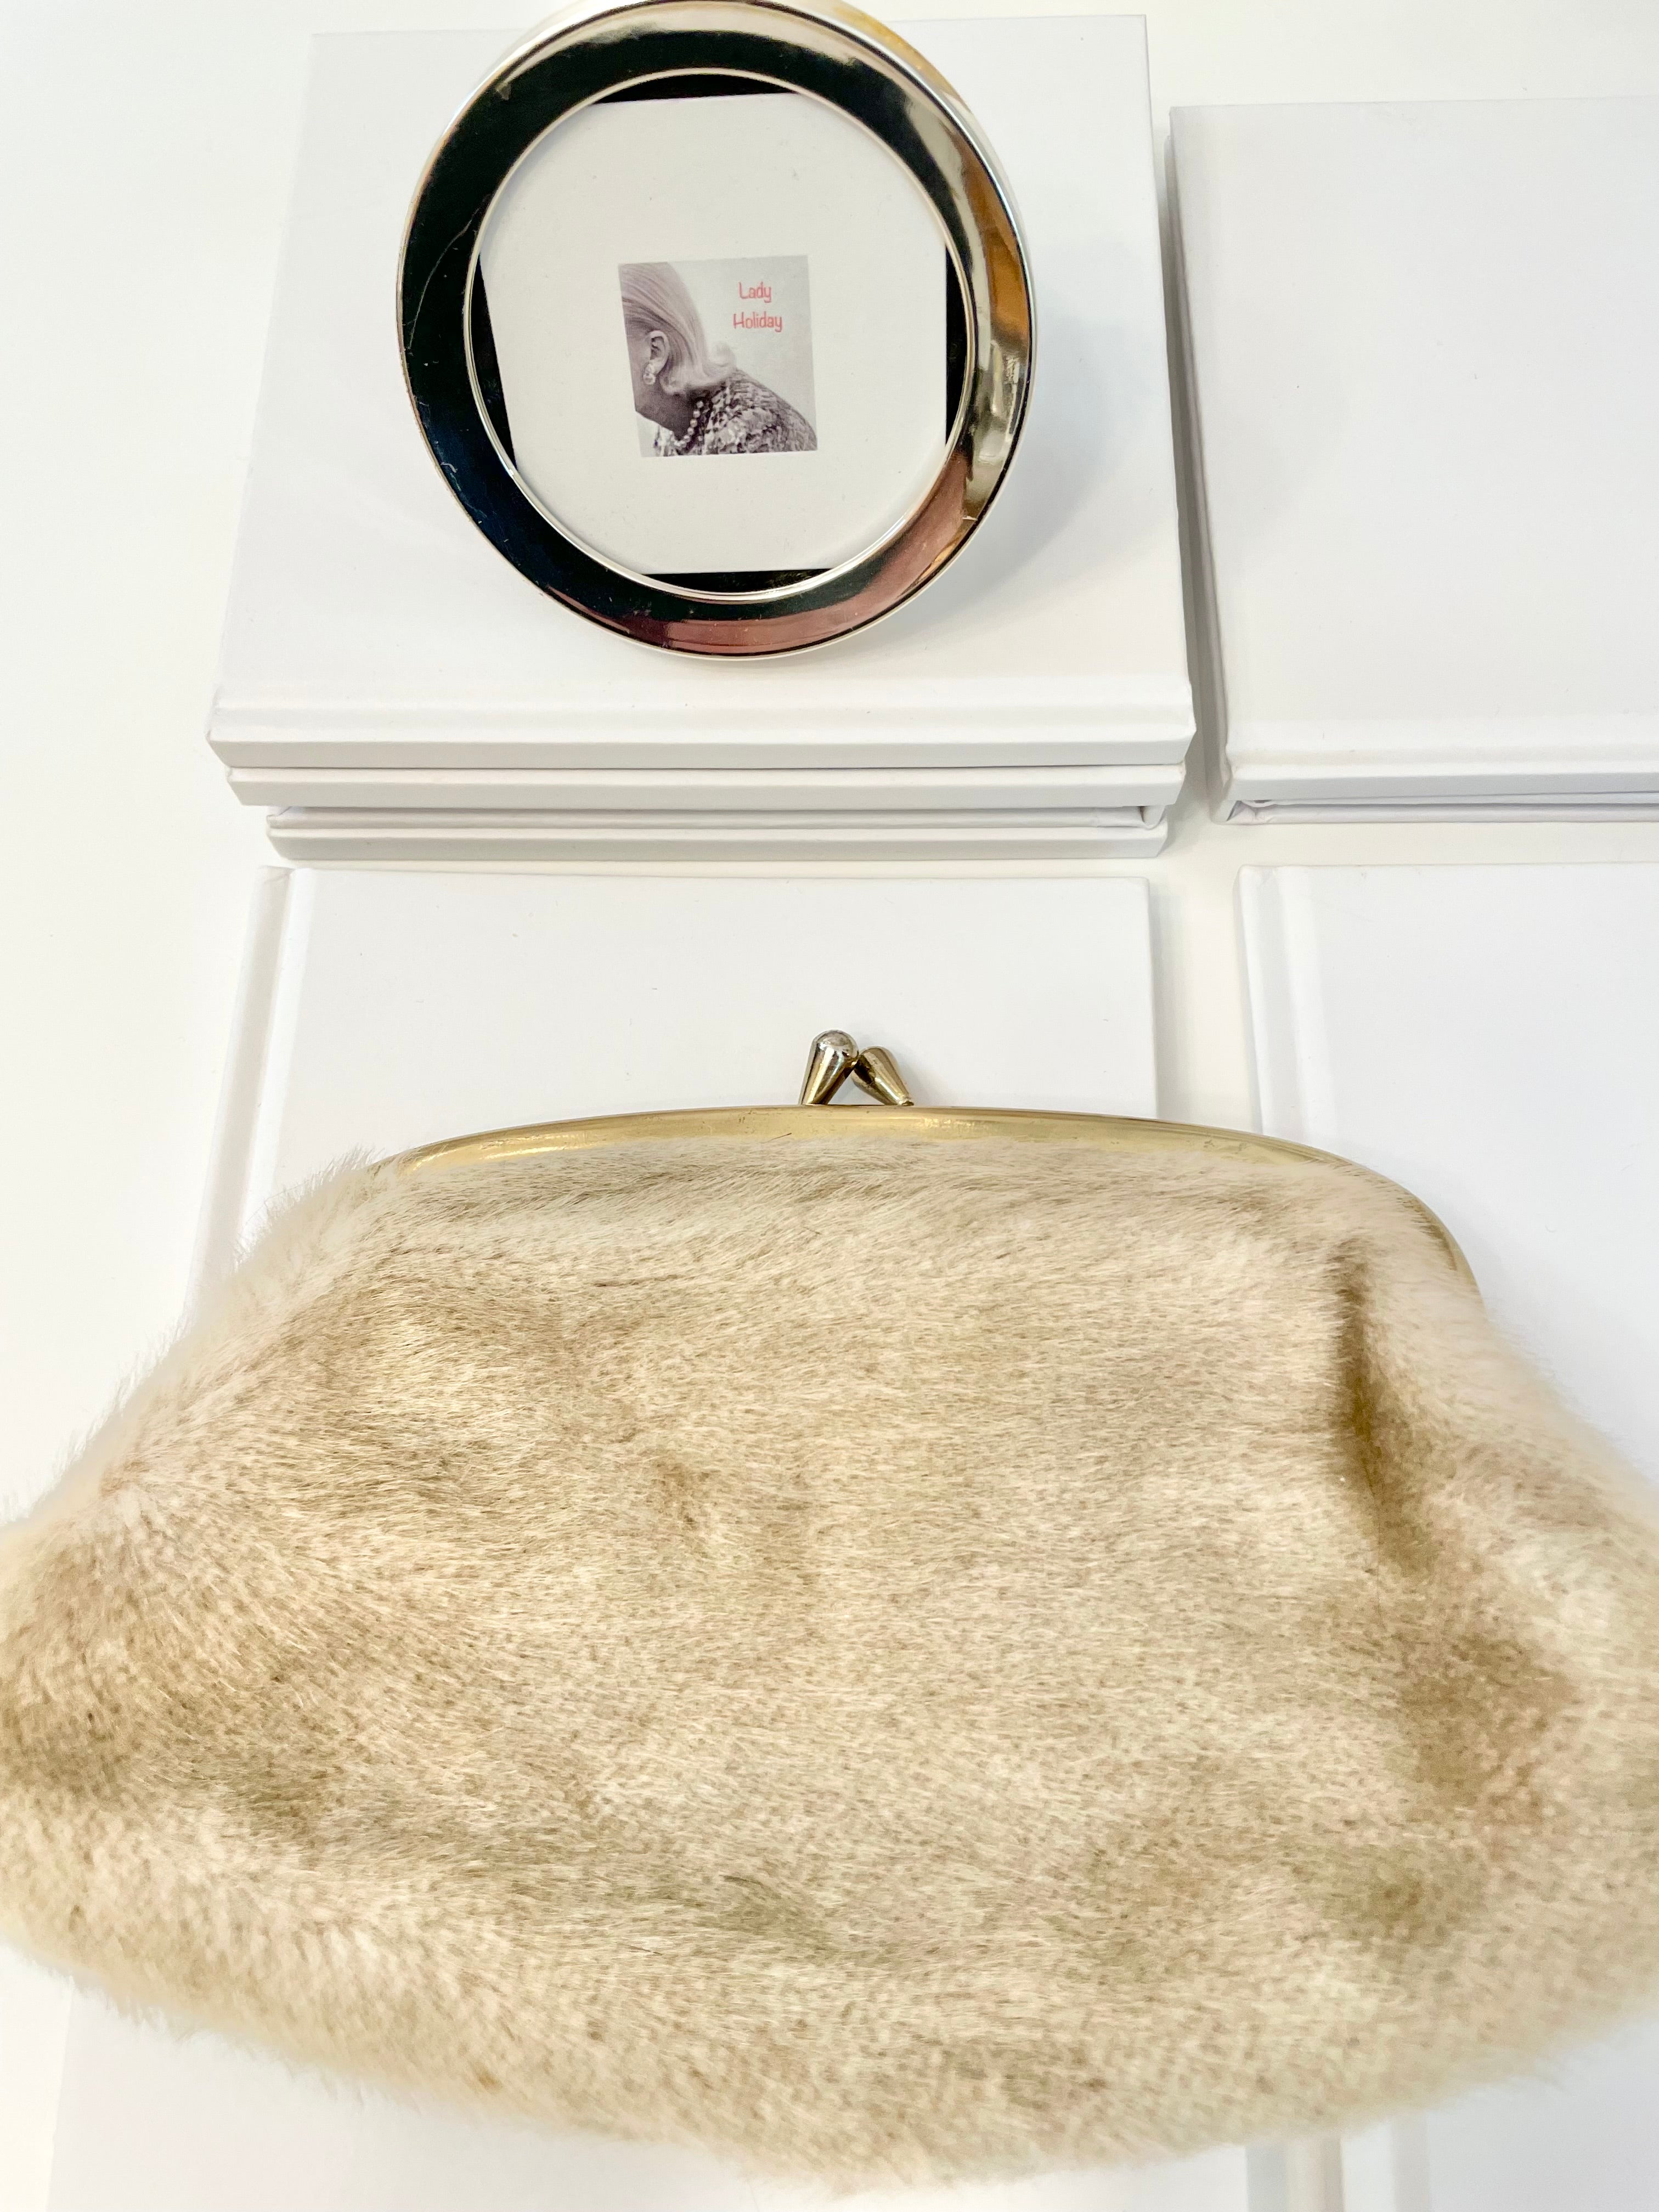 The 1960's Heiress loves a faux mink clutch bag!